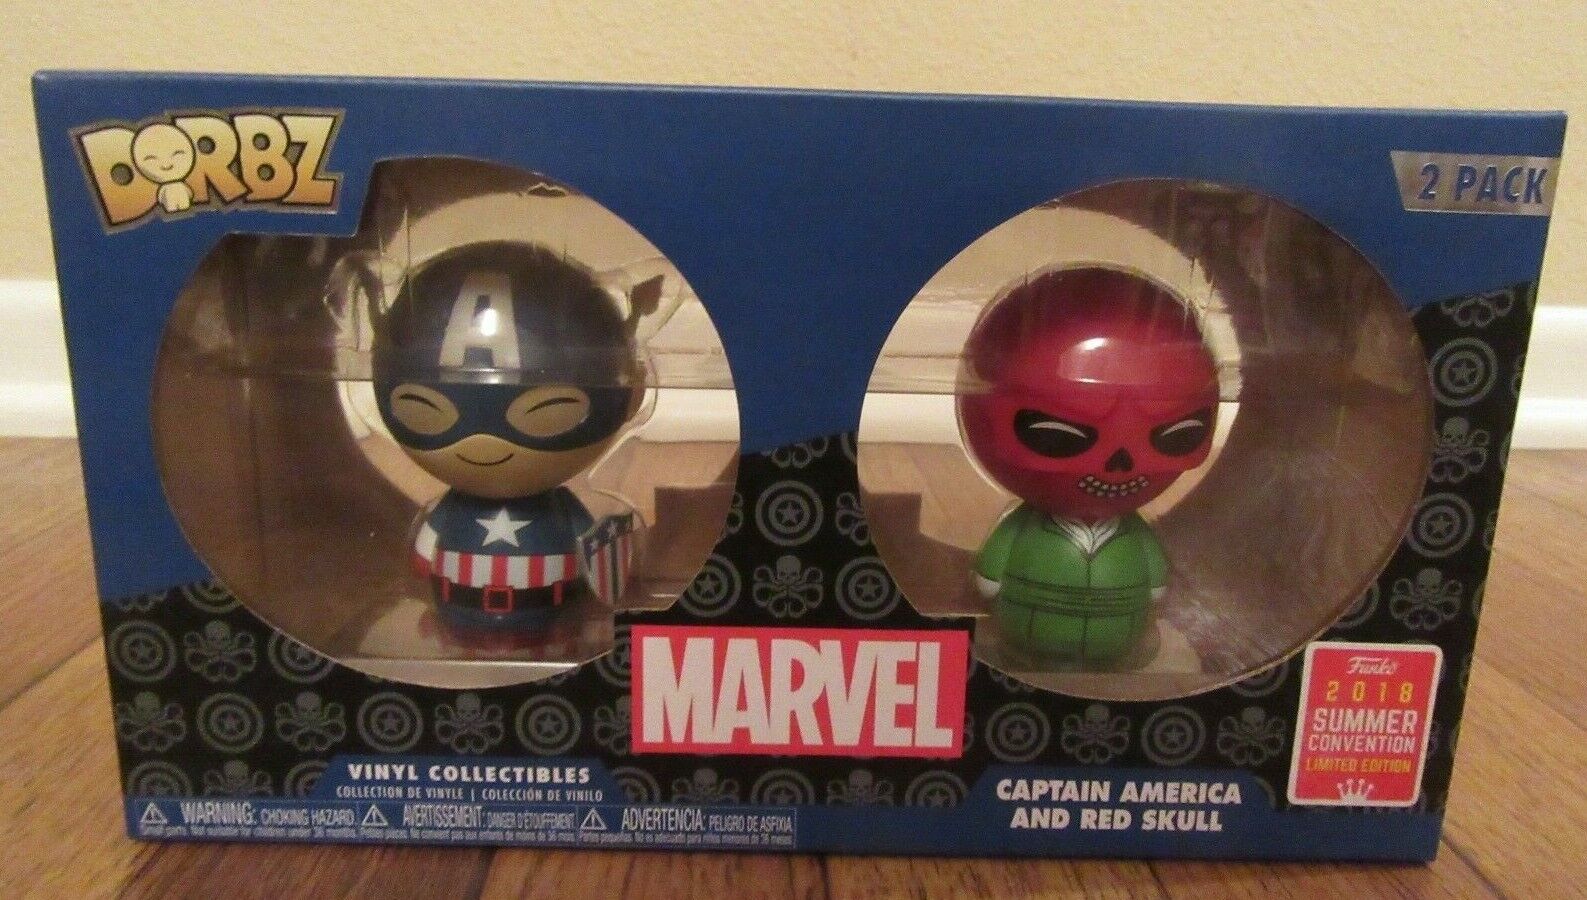 Funko Dorbz Marvel Captain America and Red Skull 2-Pack 2018 Summer Convention 